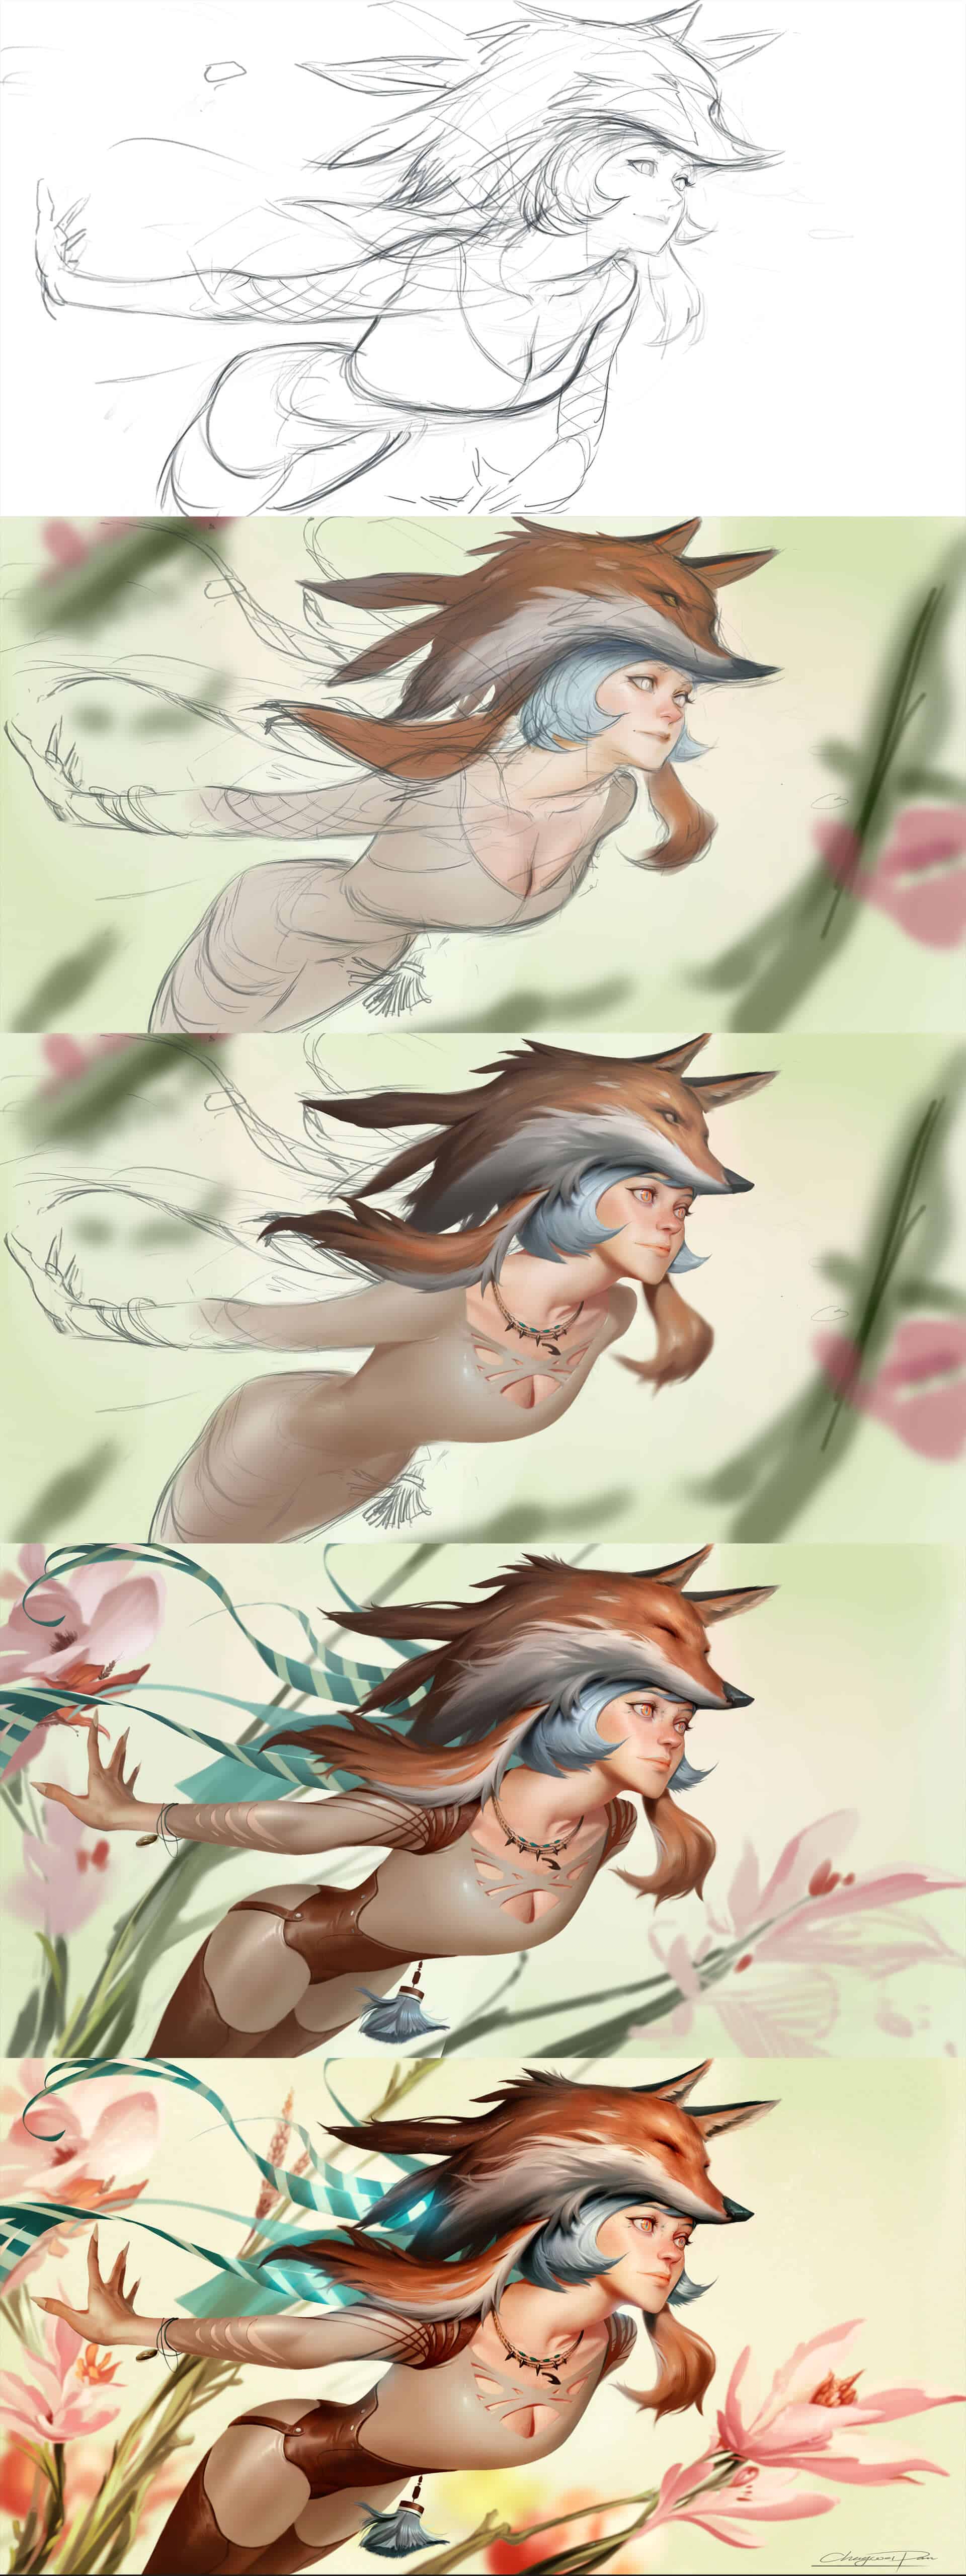 "Fox Spirit" by Chengwei Pain - Painting Process